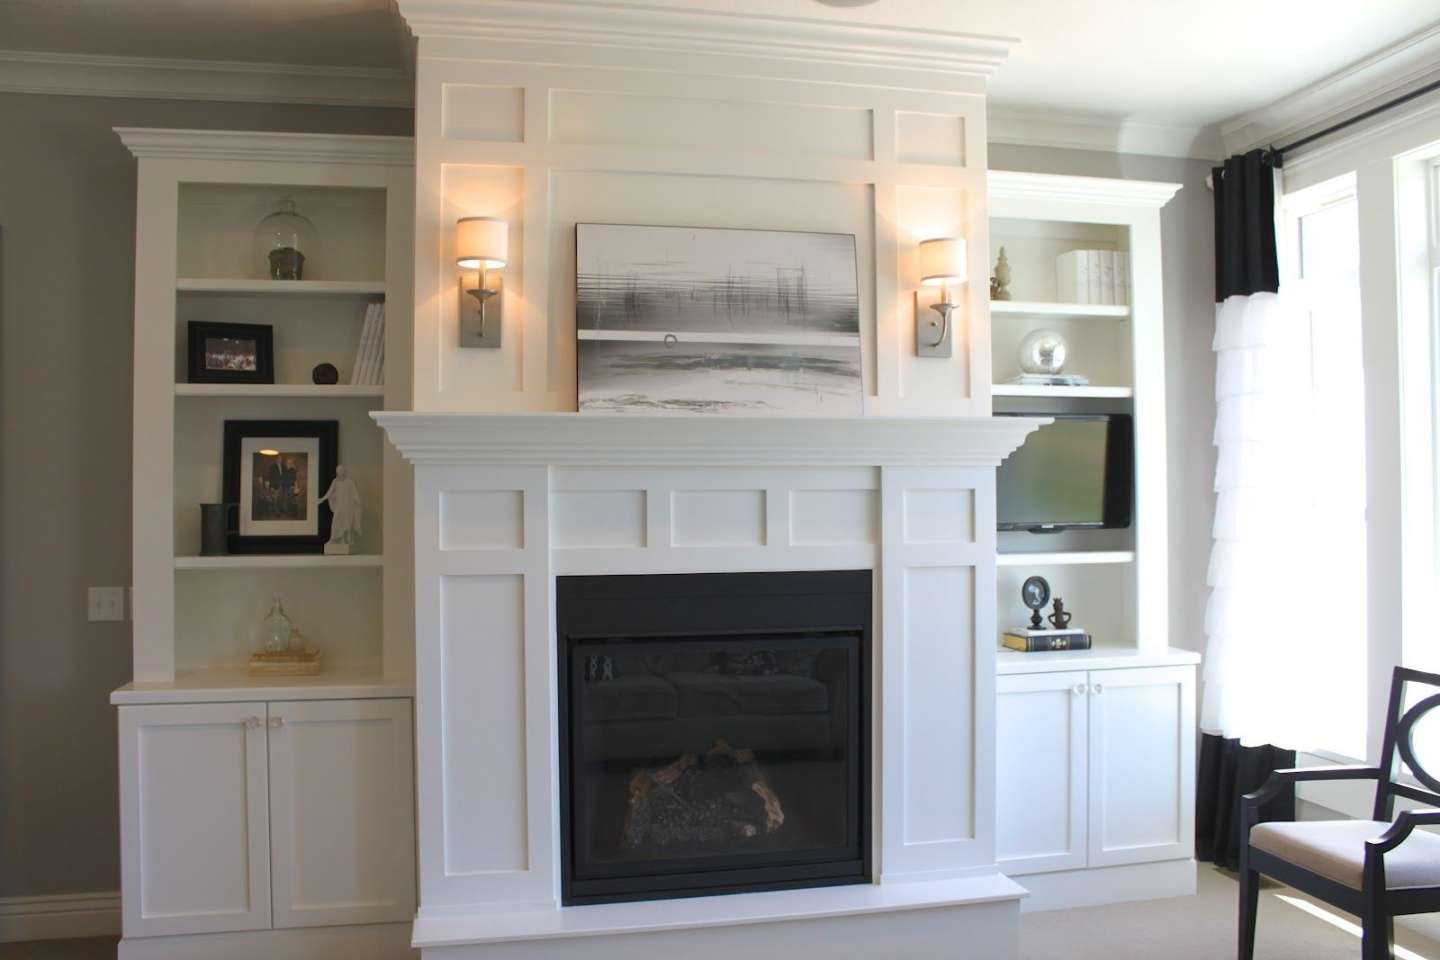 Fireplace with Bookshelves On Each Side Ideas - built in bookcases